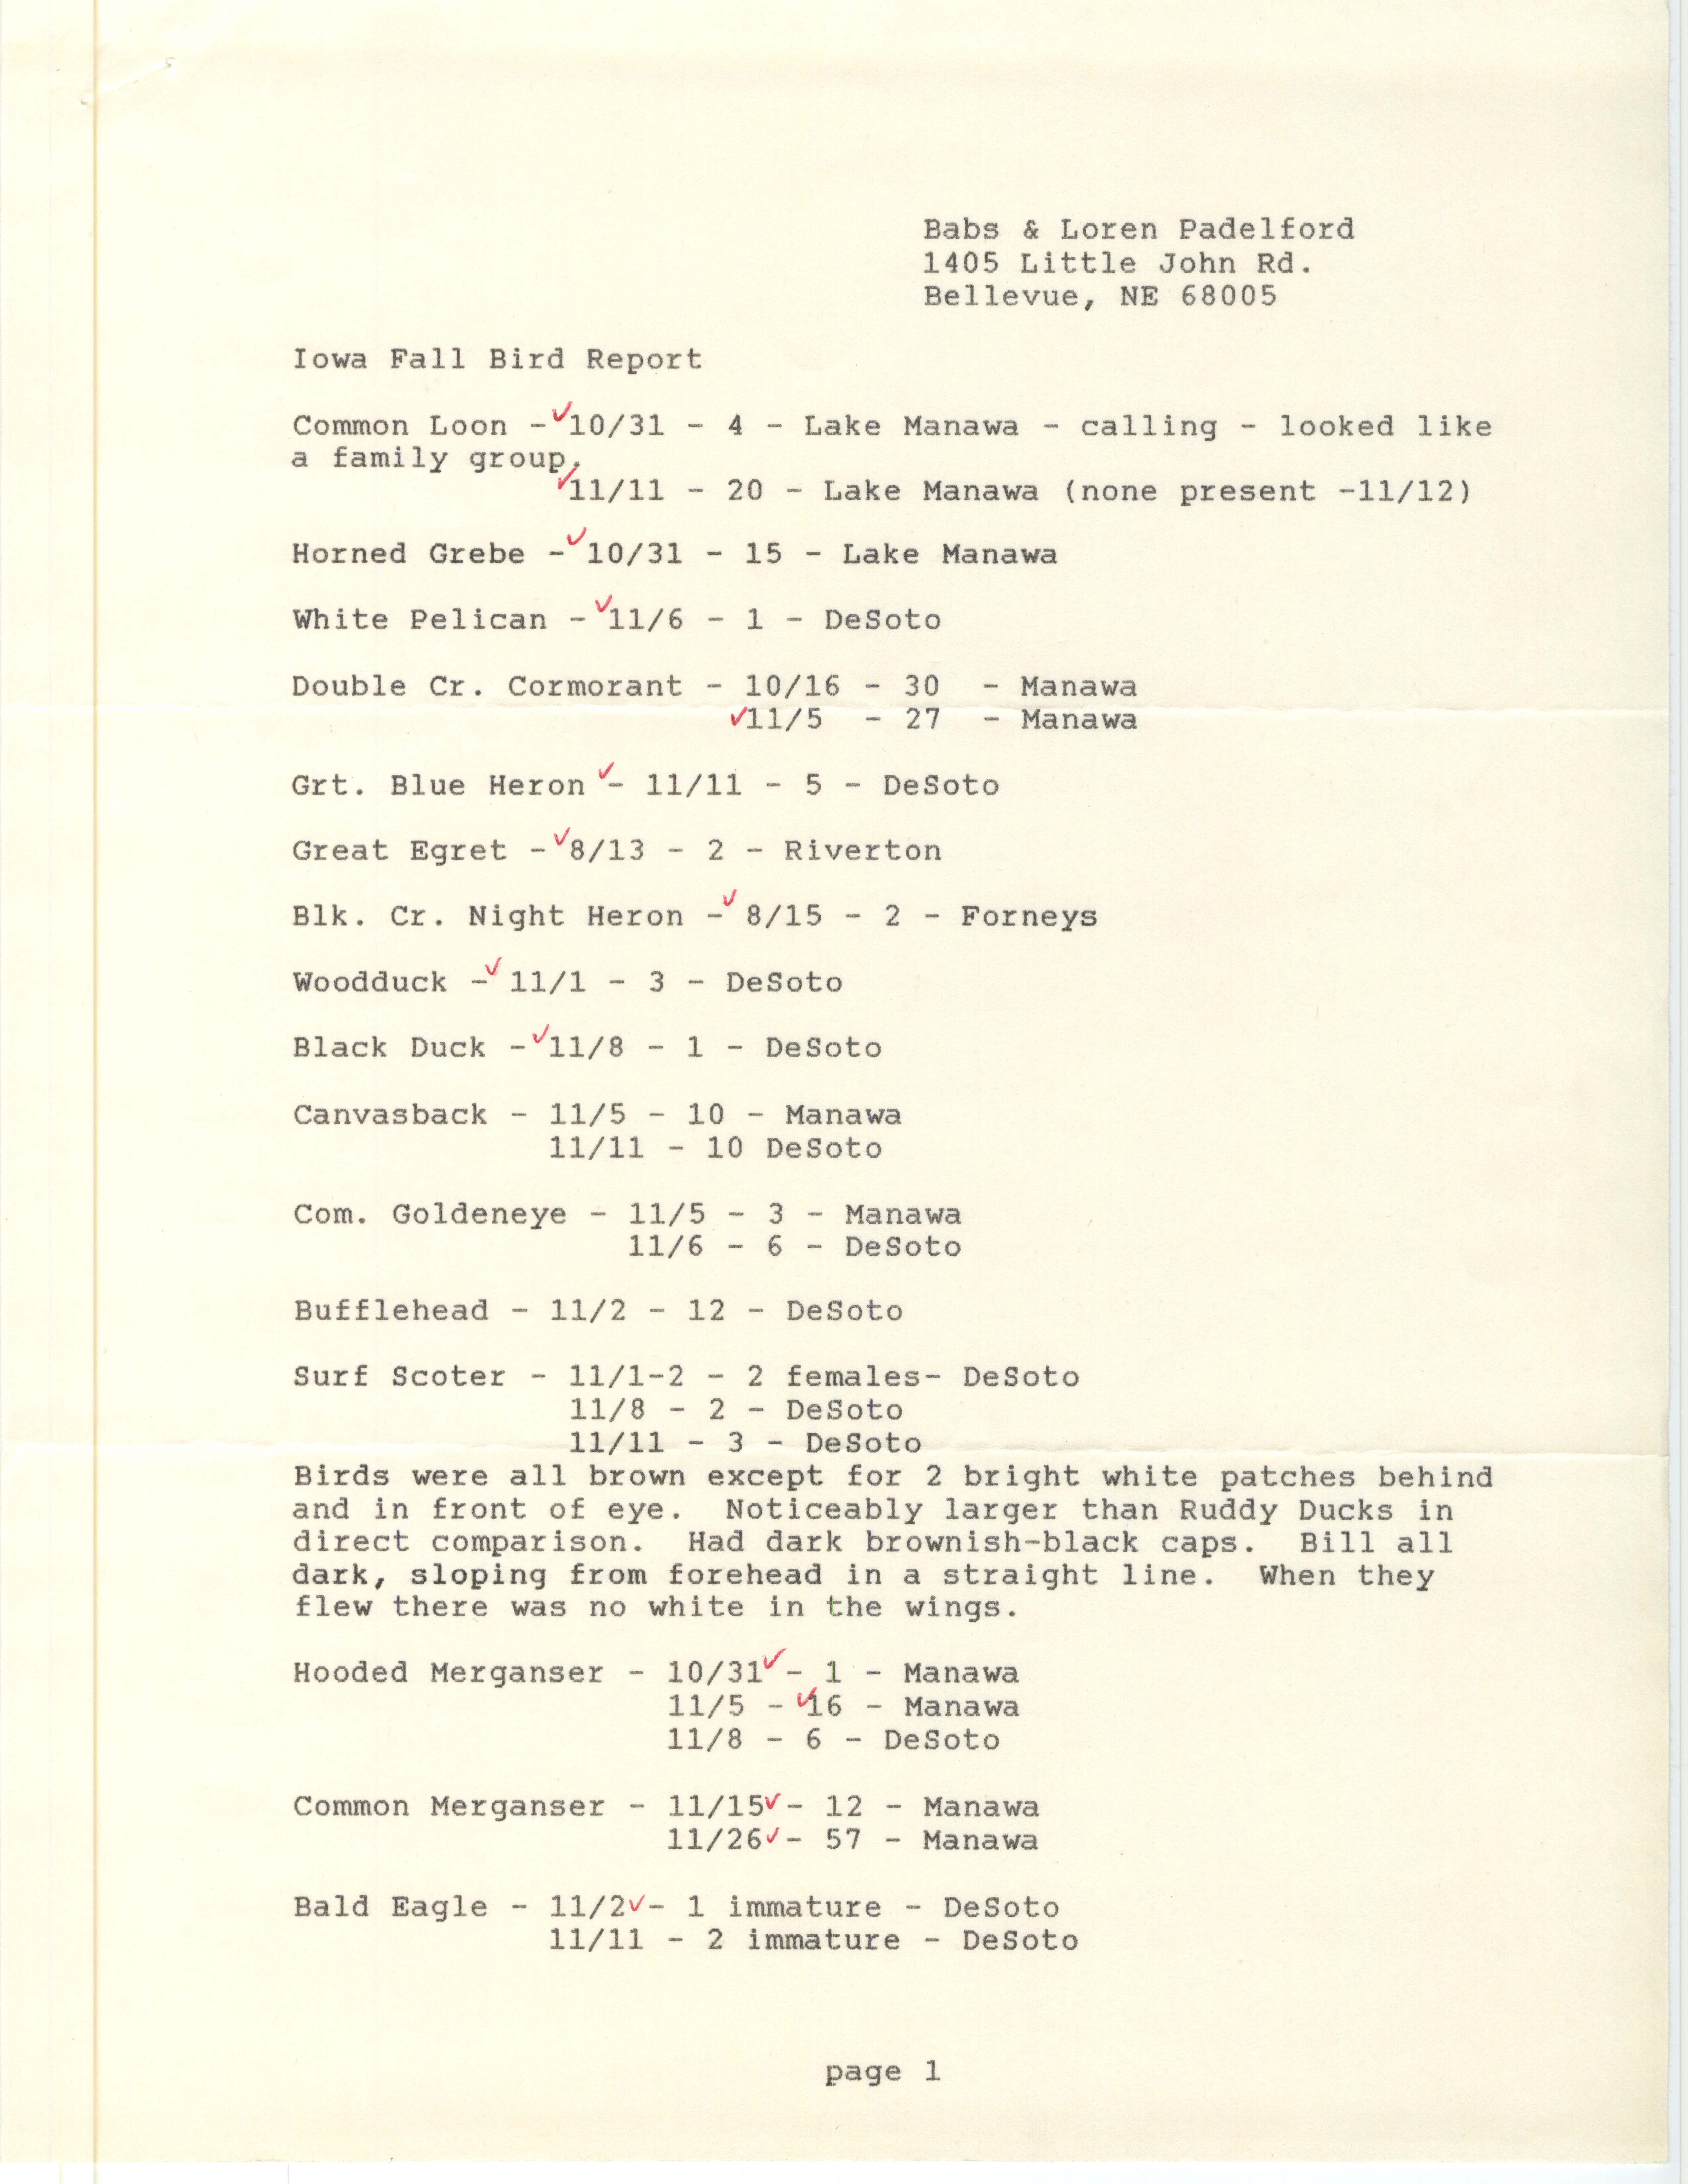 Iowa fall bird report contributed by Babs Padelford and Loren Padelford, fall 1987